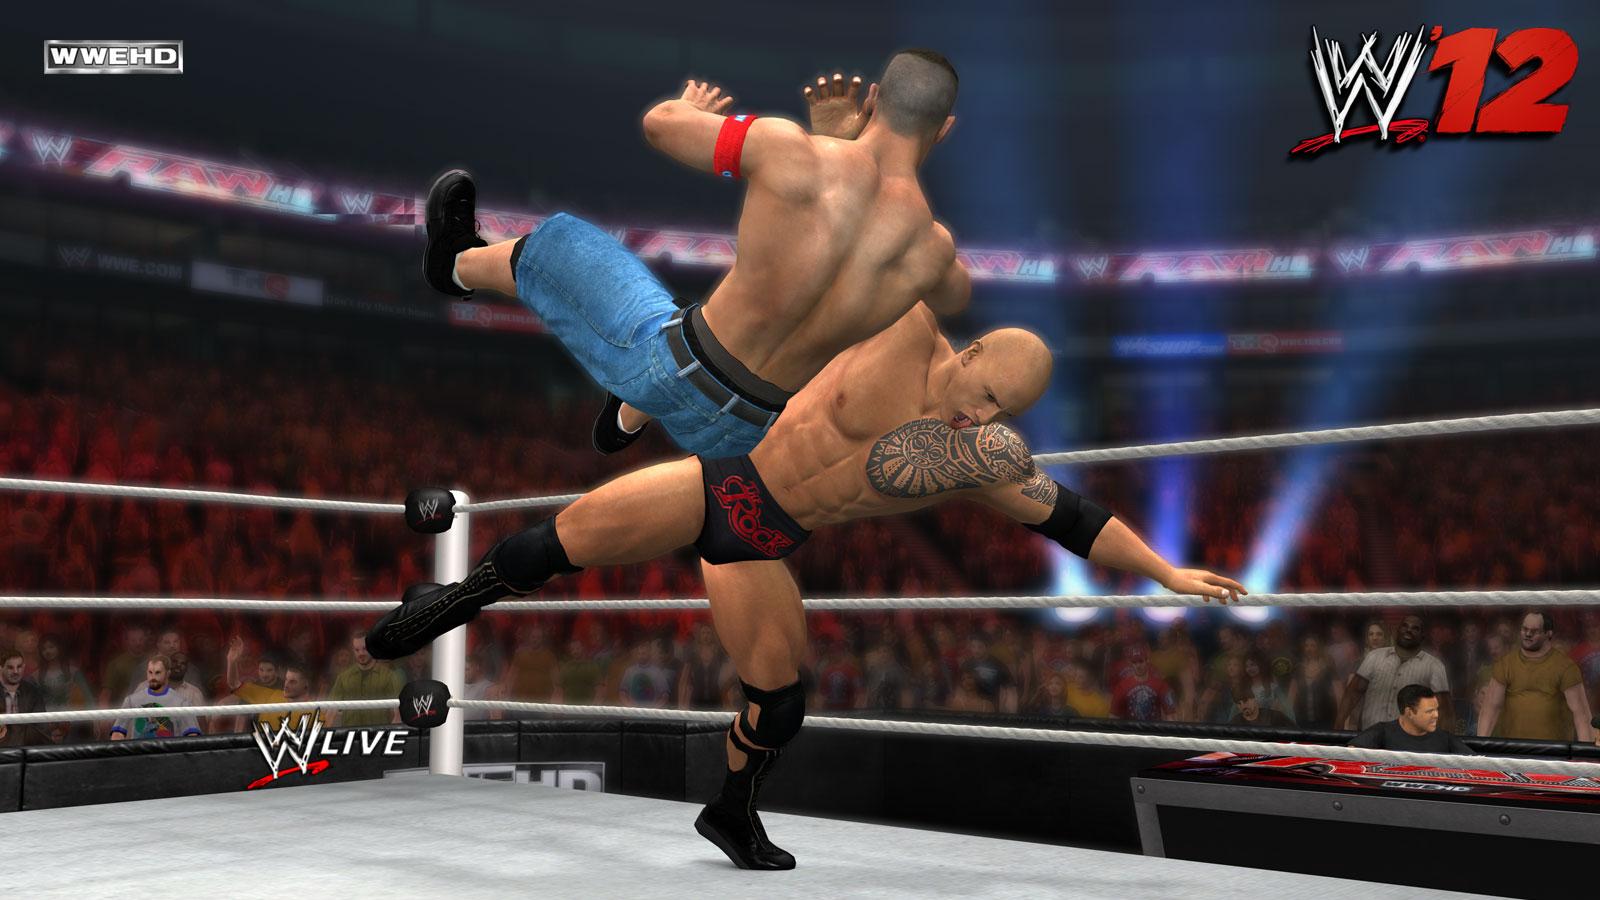 WWE 12 Game Highly Compressed For PC